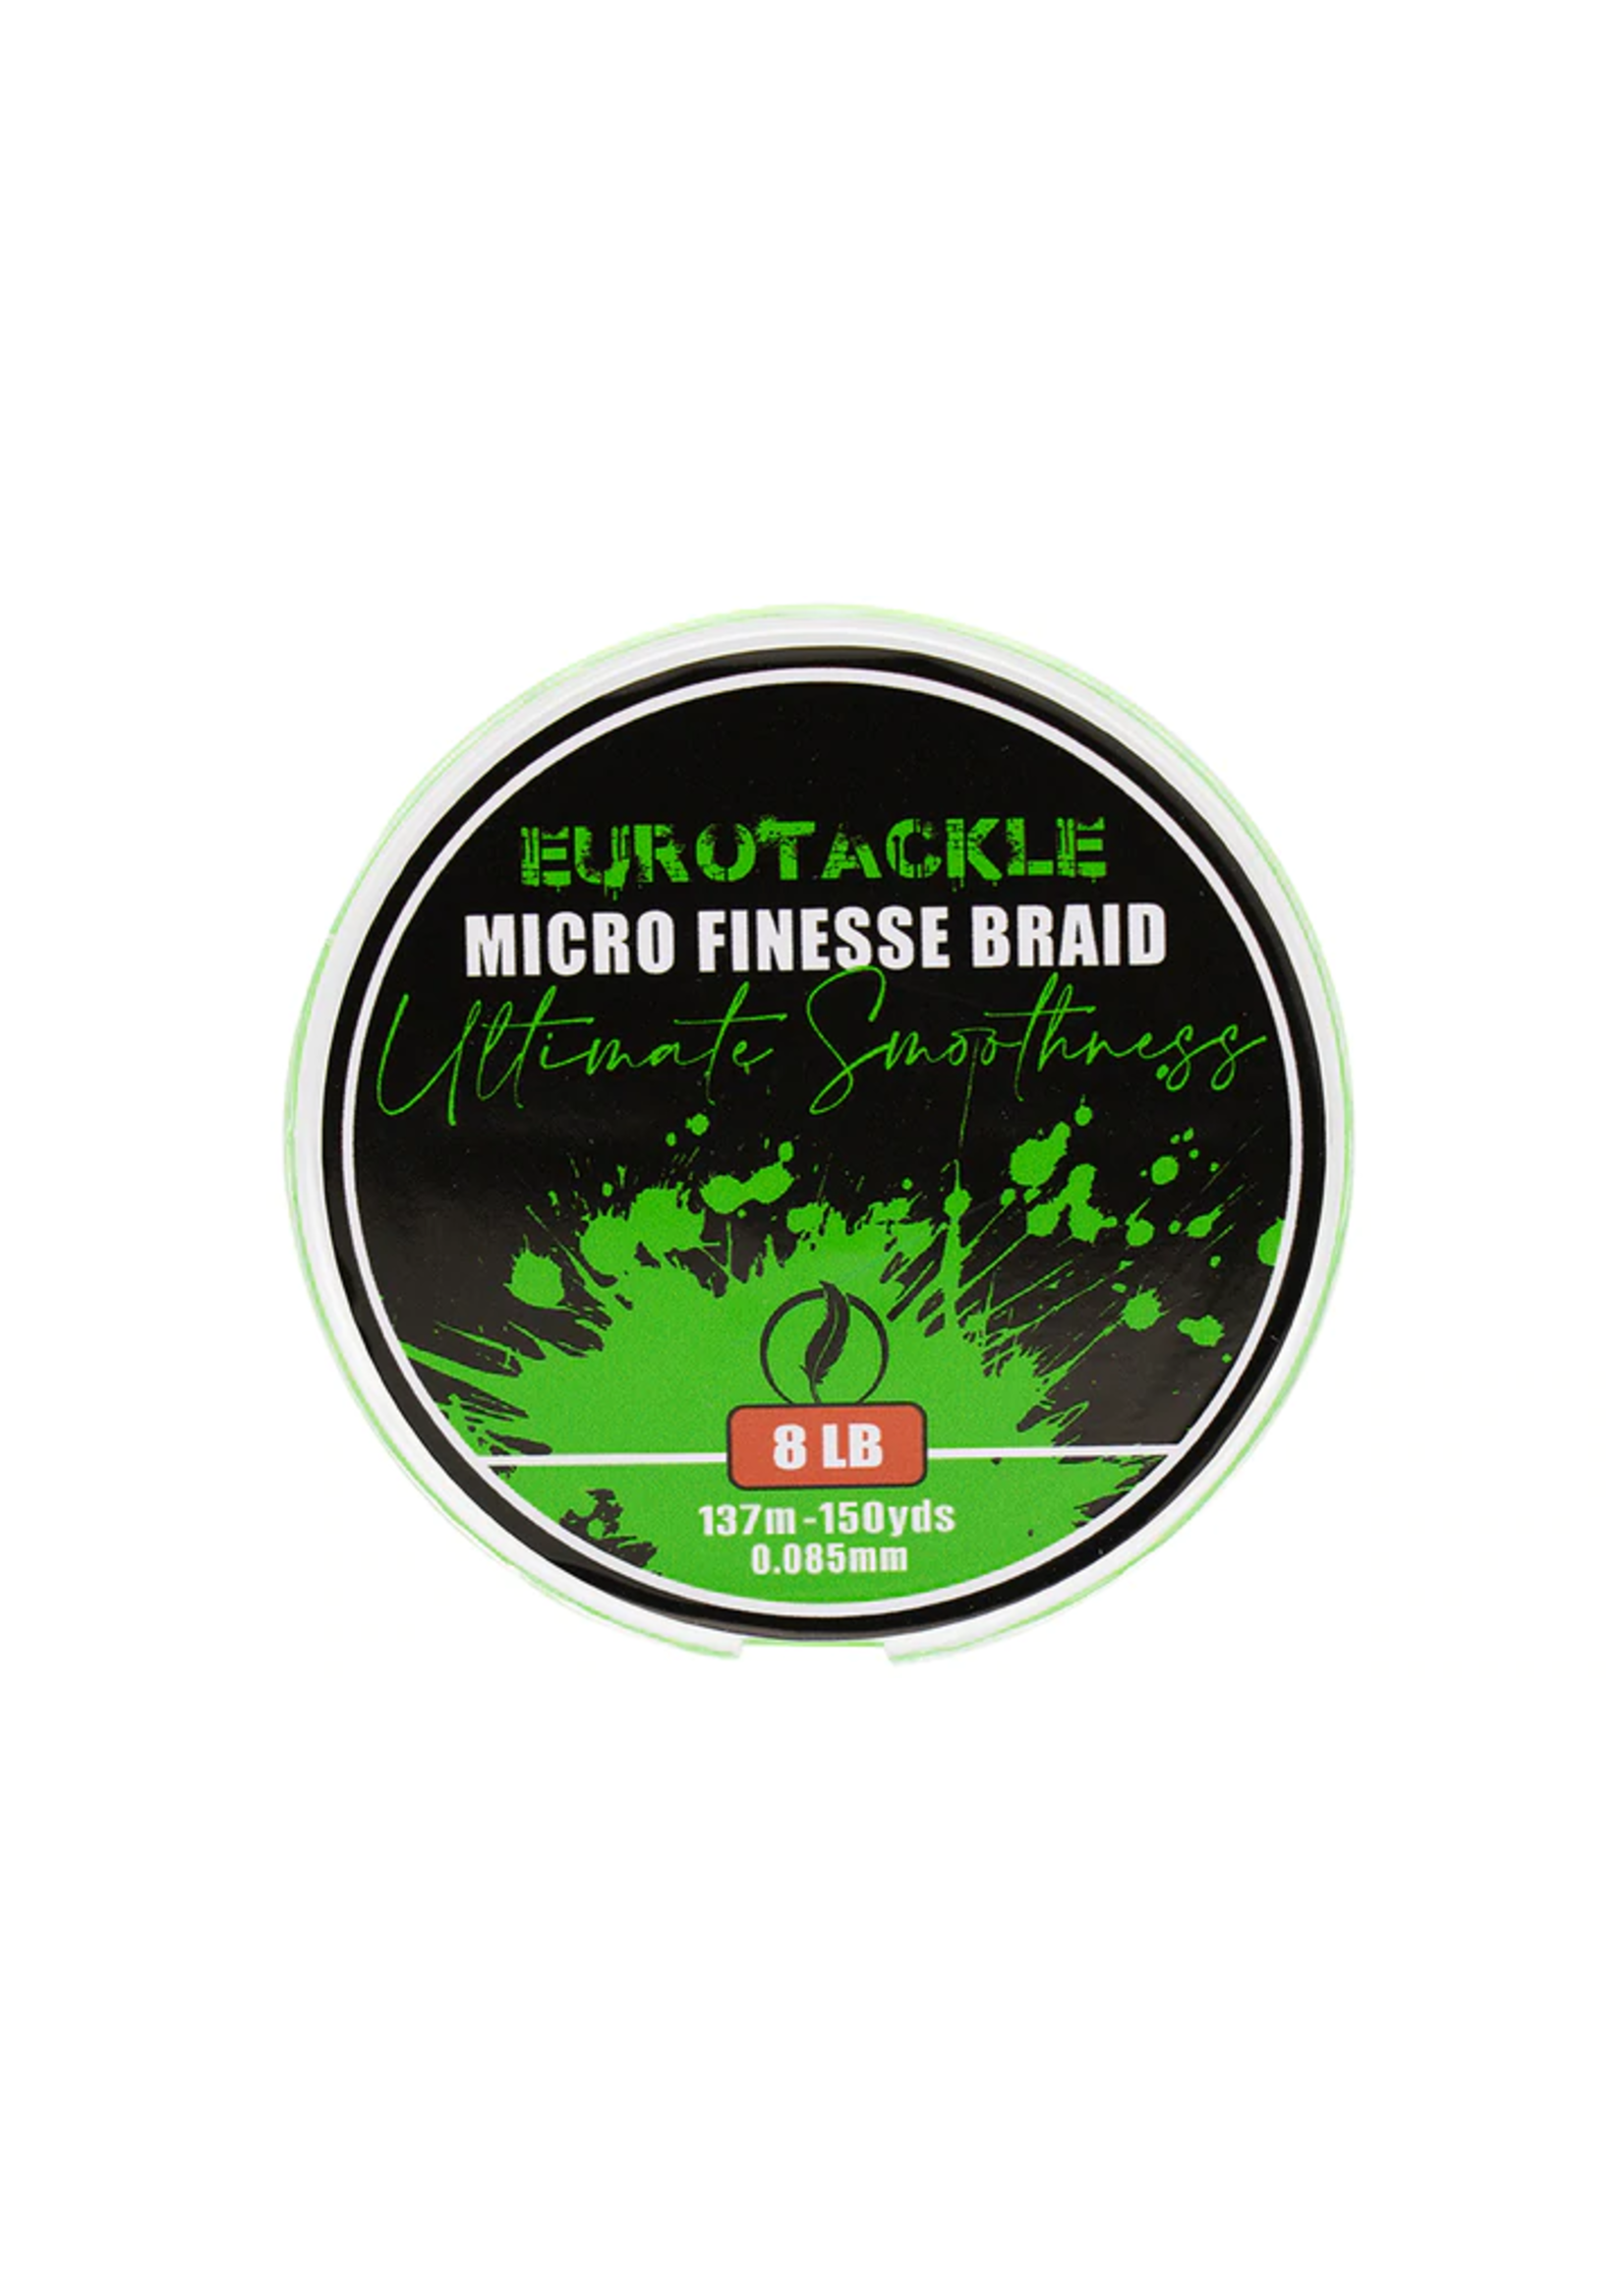 Eurotackle Eurotackle Micro Finesse "Ultimate Smoothness" Braid